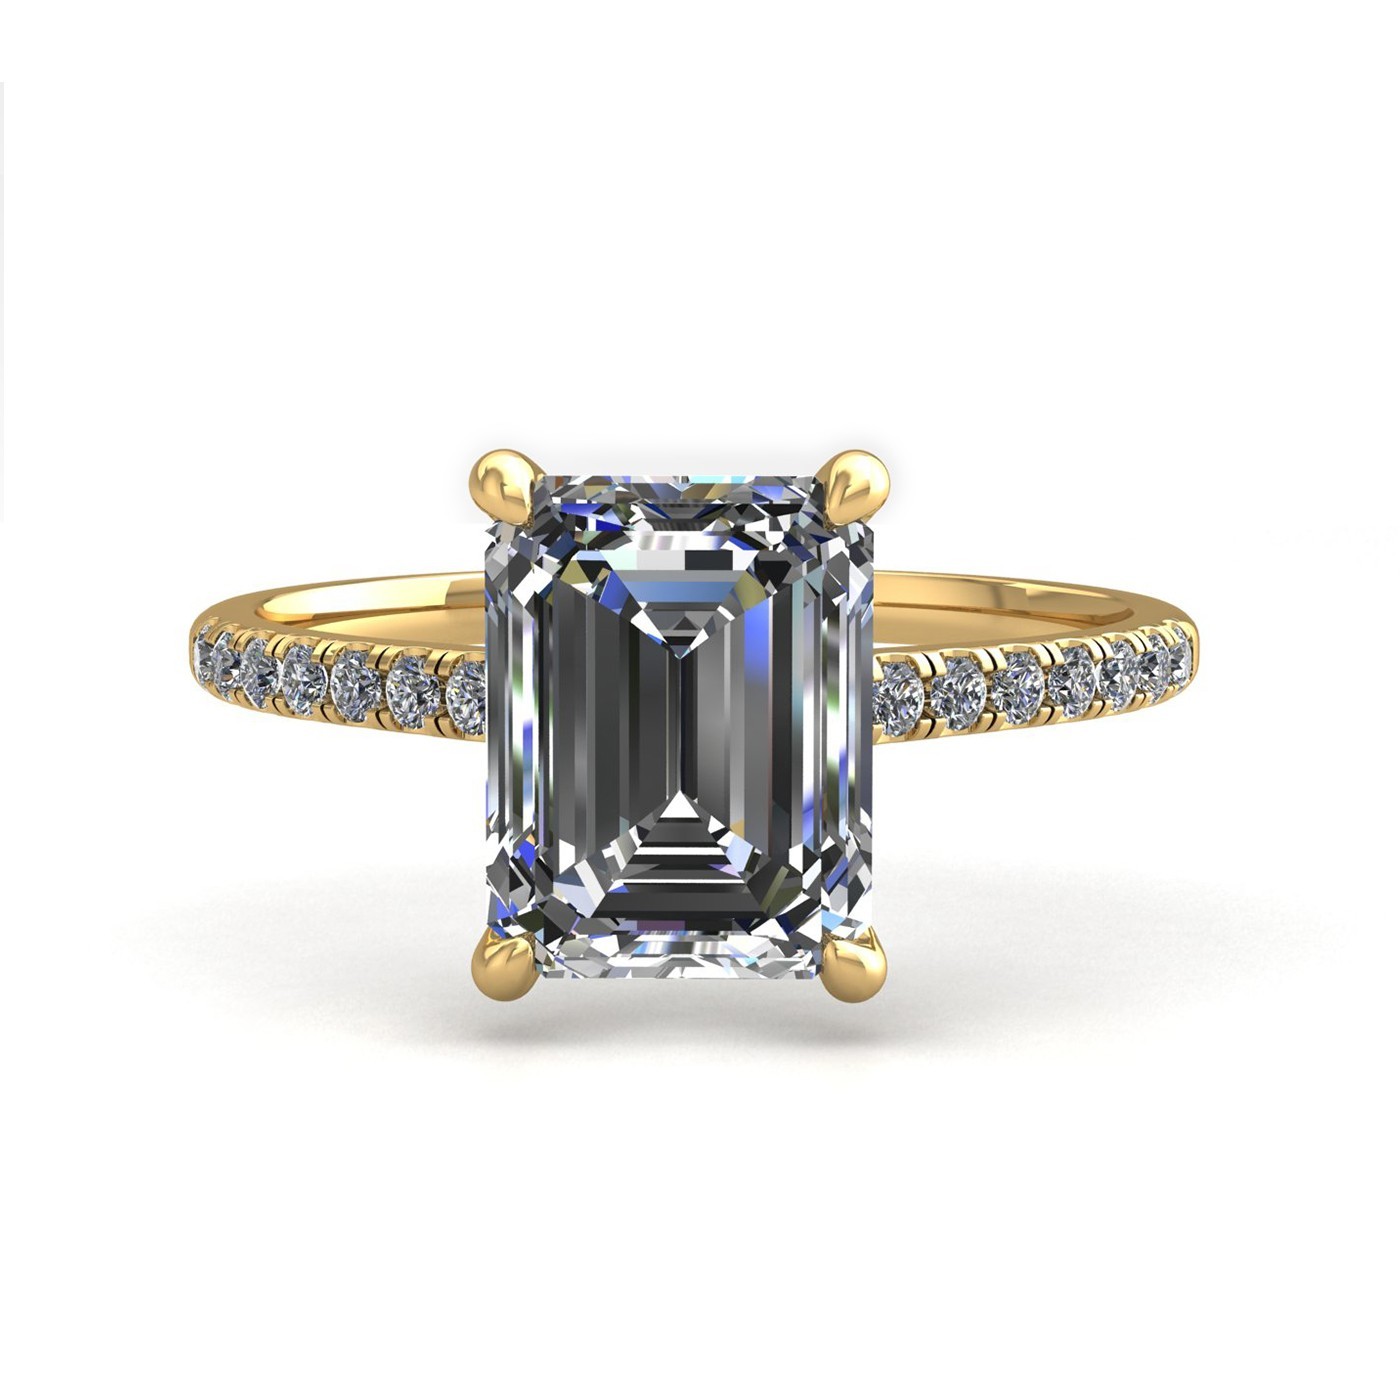 18k yellow gold 0,30 ct 4 prongs emerald cut diamond engagement ring with whisper thin pavÉ set band Photos & images